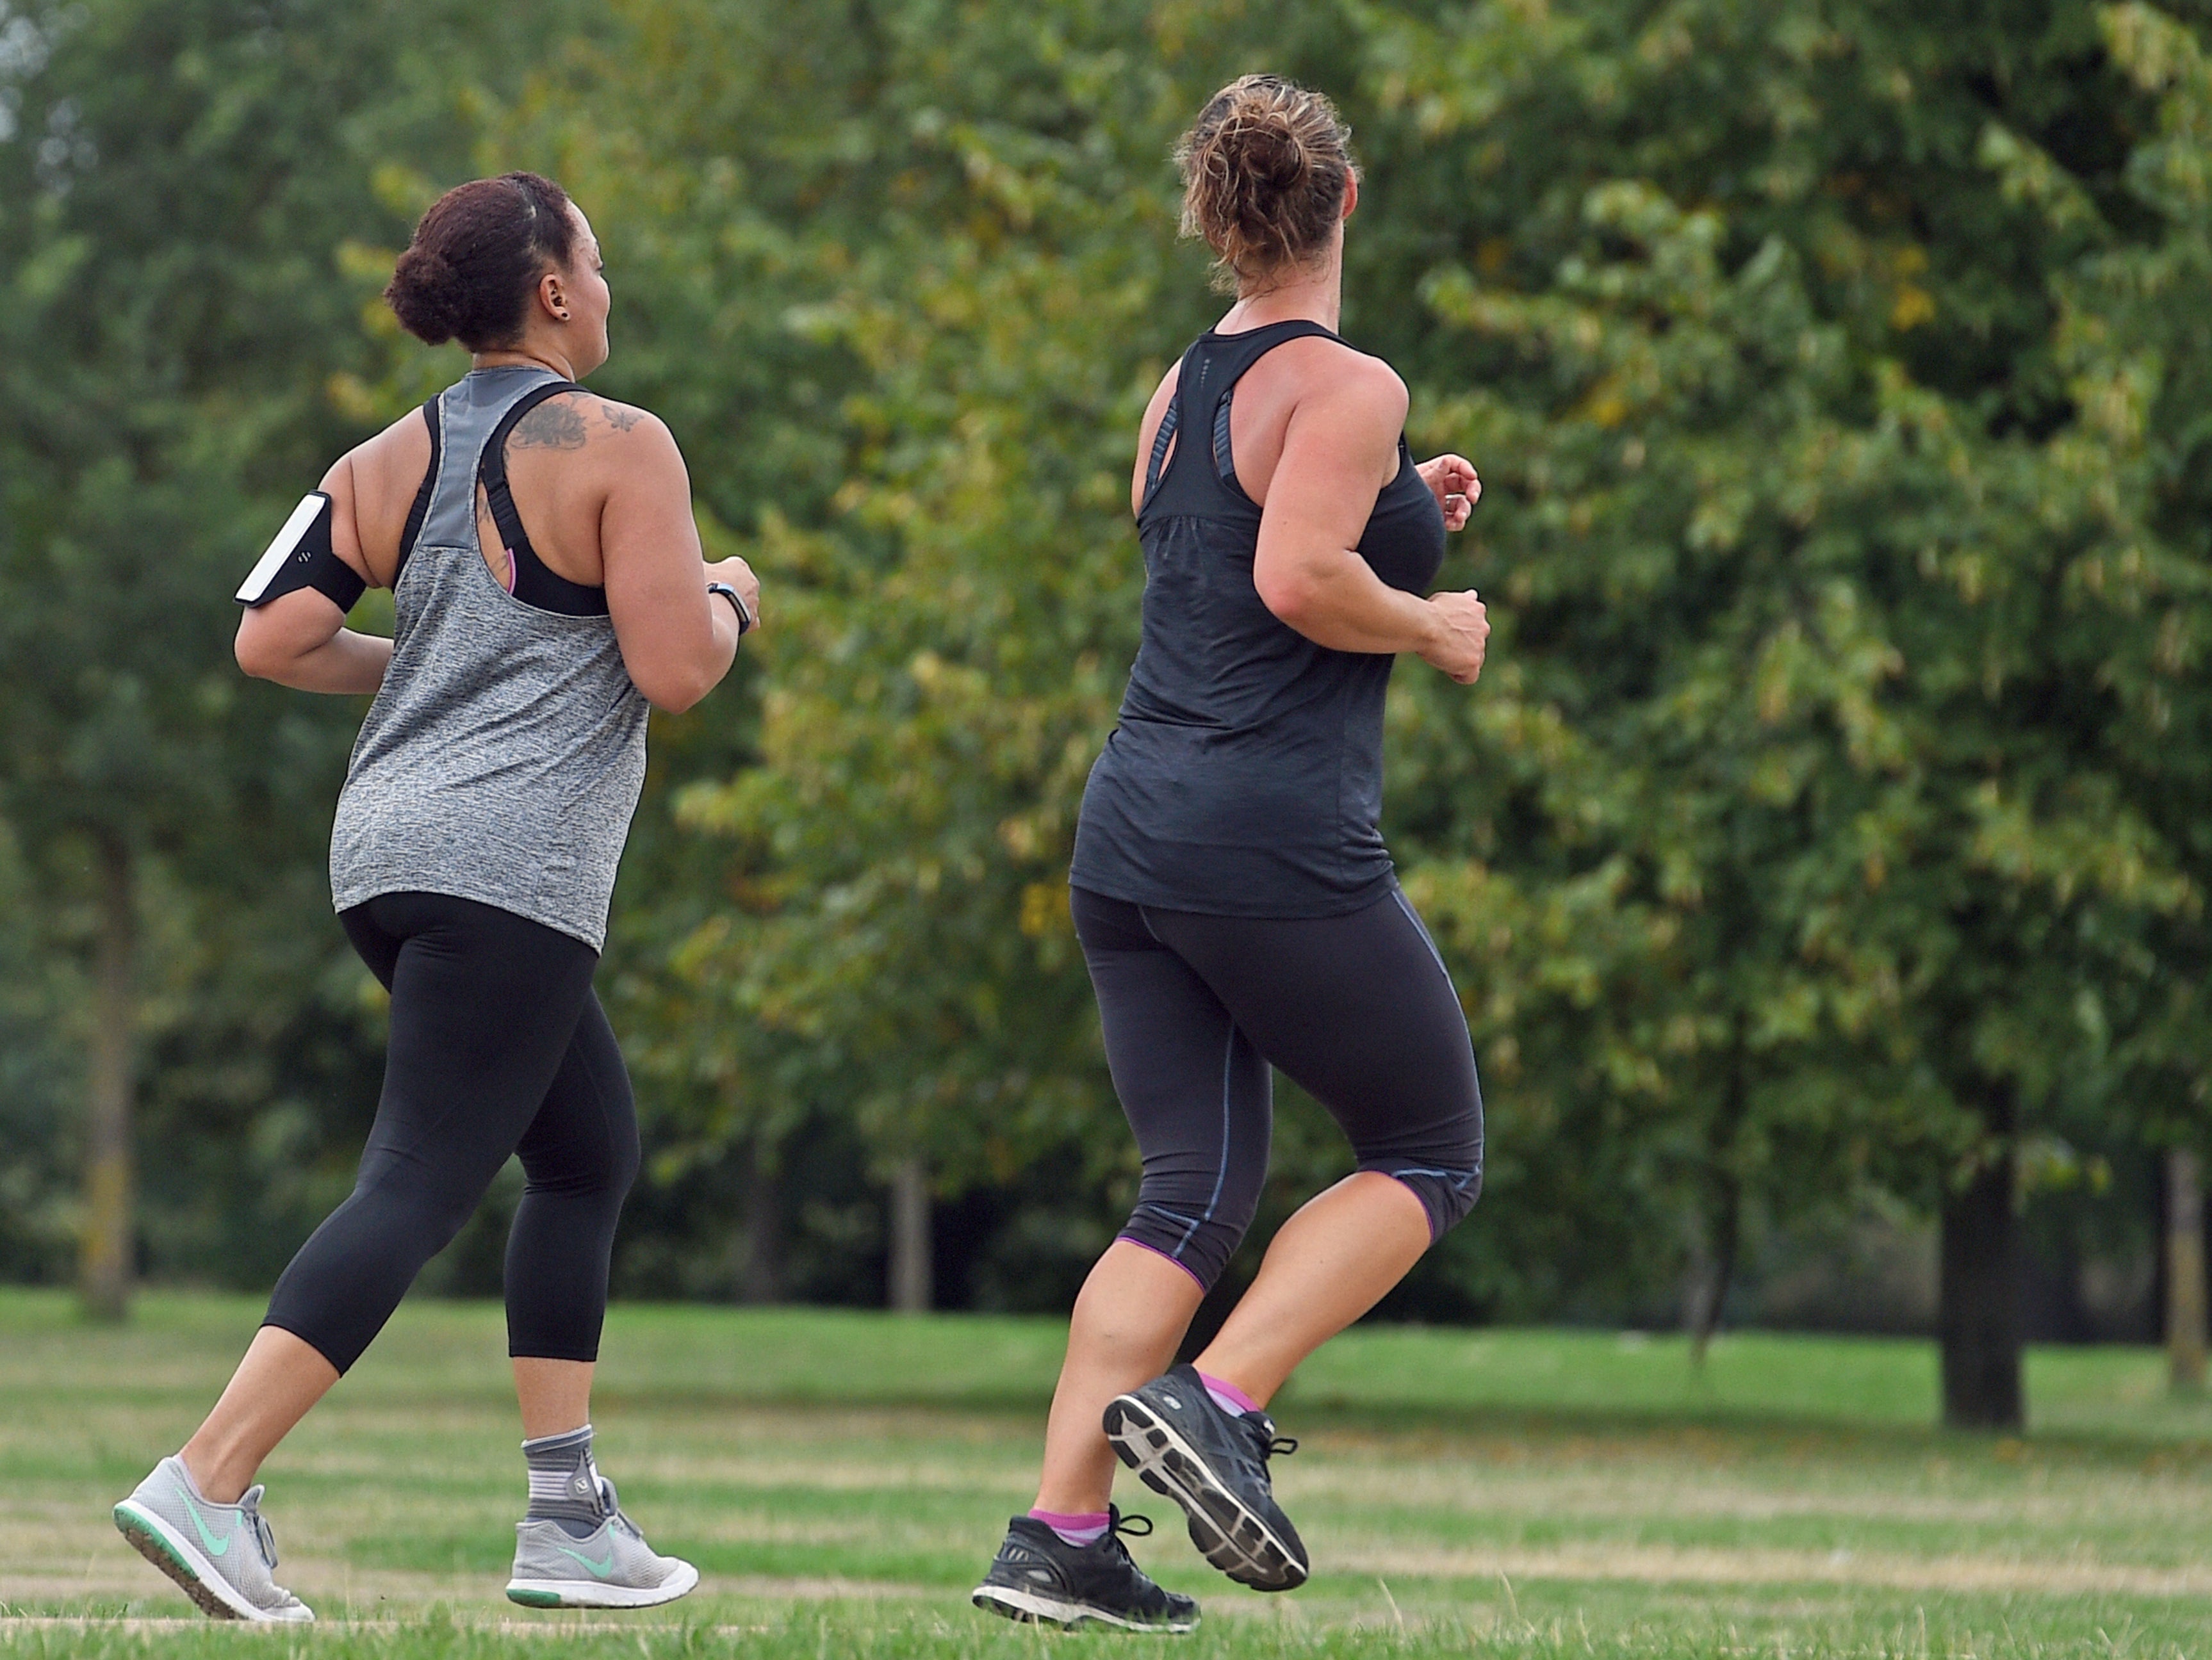 Government wants to use jogging to get people back into work